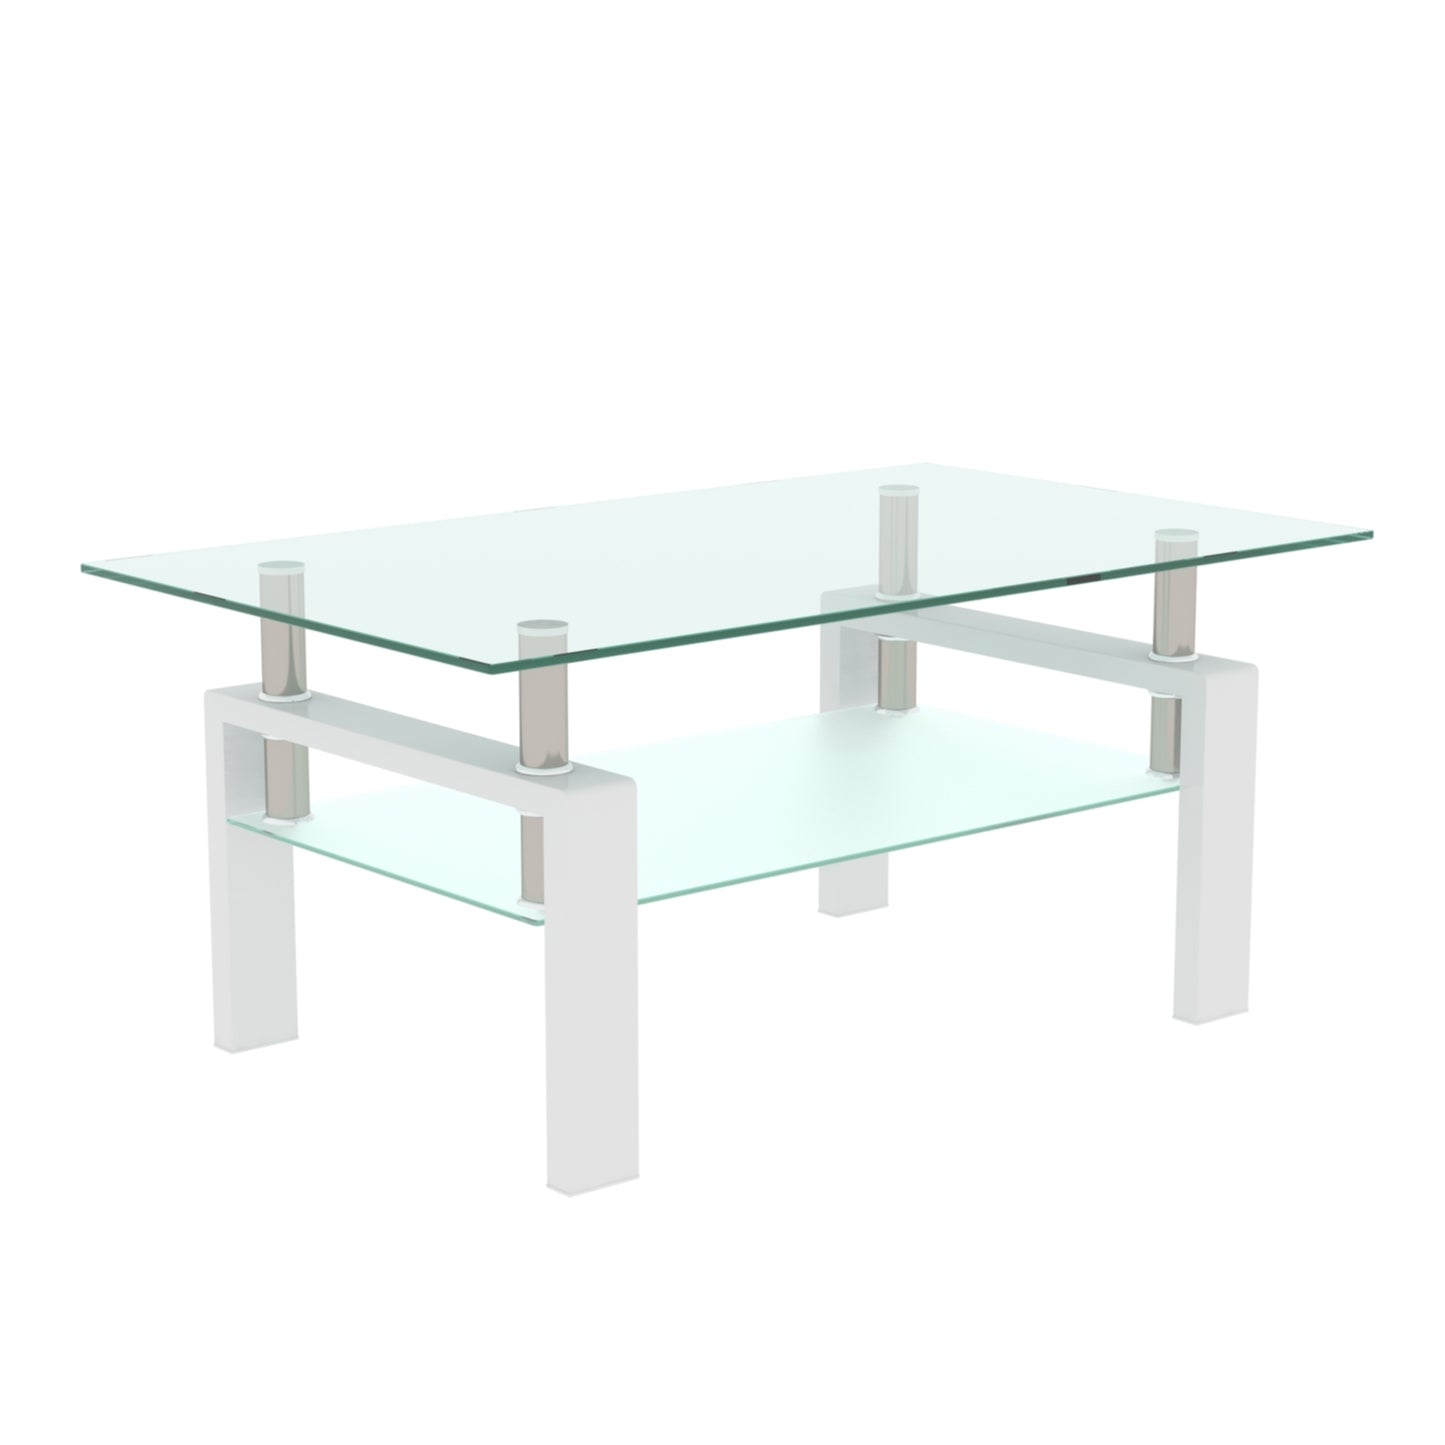 Elegant White Glass Coffee Table with Storage - Modern Living Room Furniture